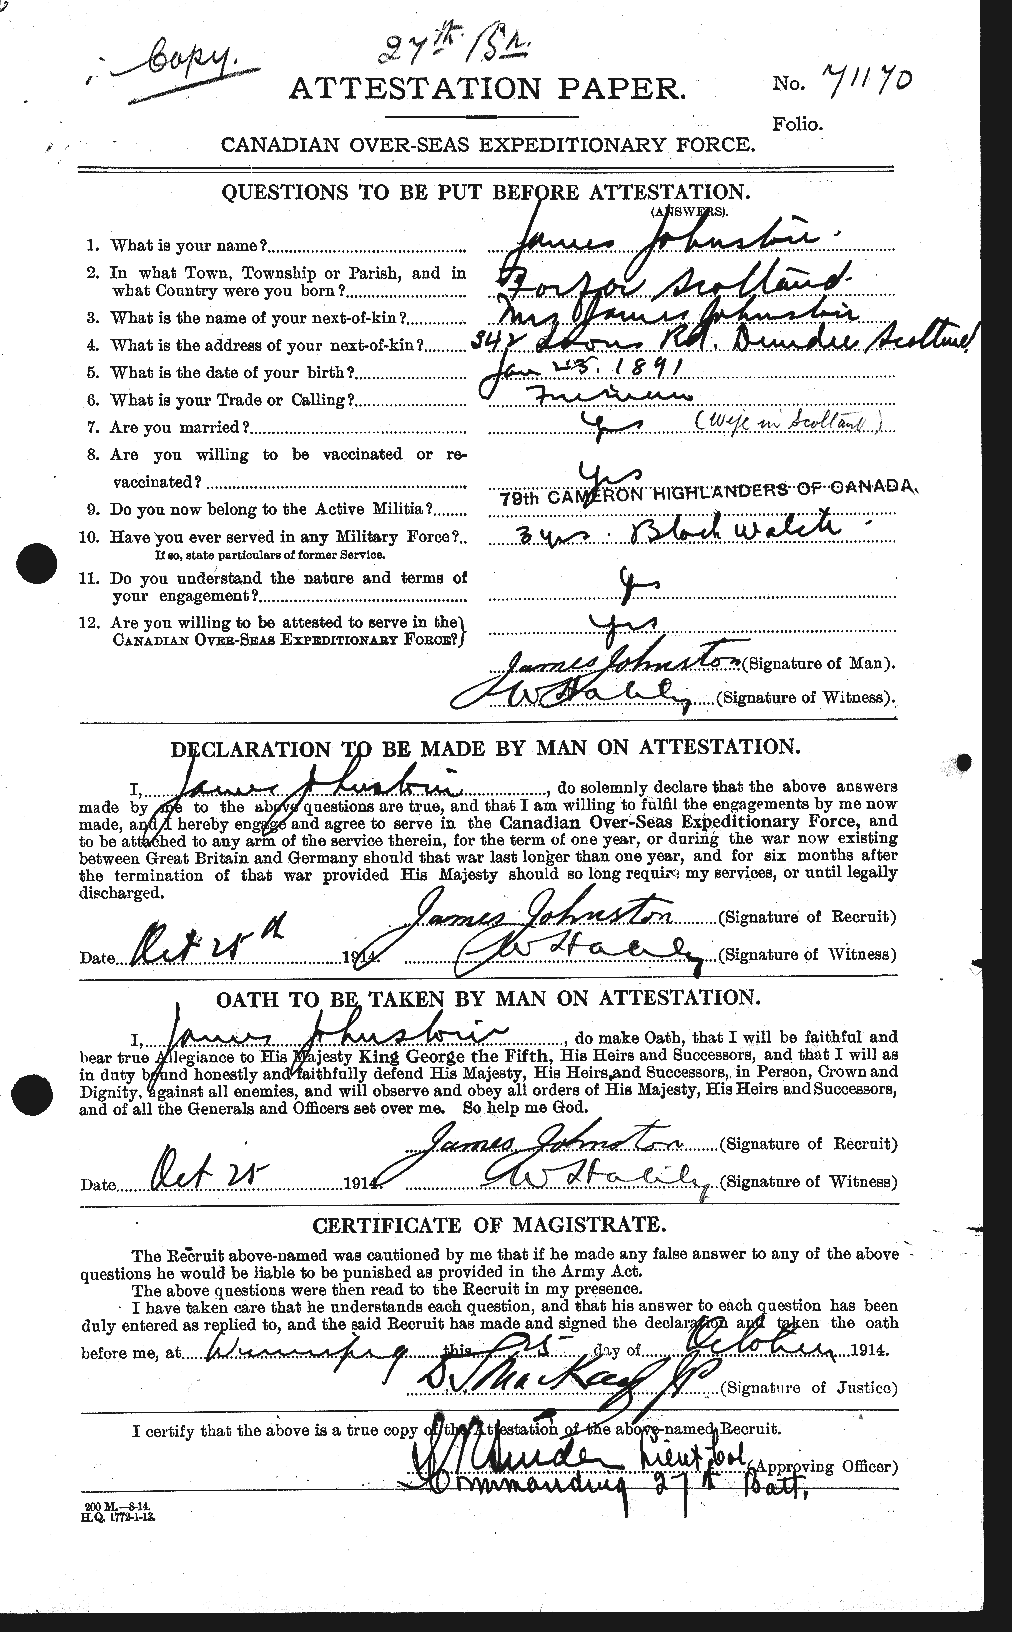 Personnel Records of the First World War - CEF 422715a